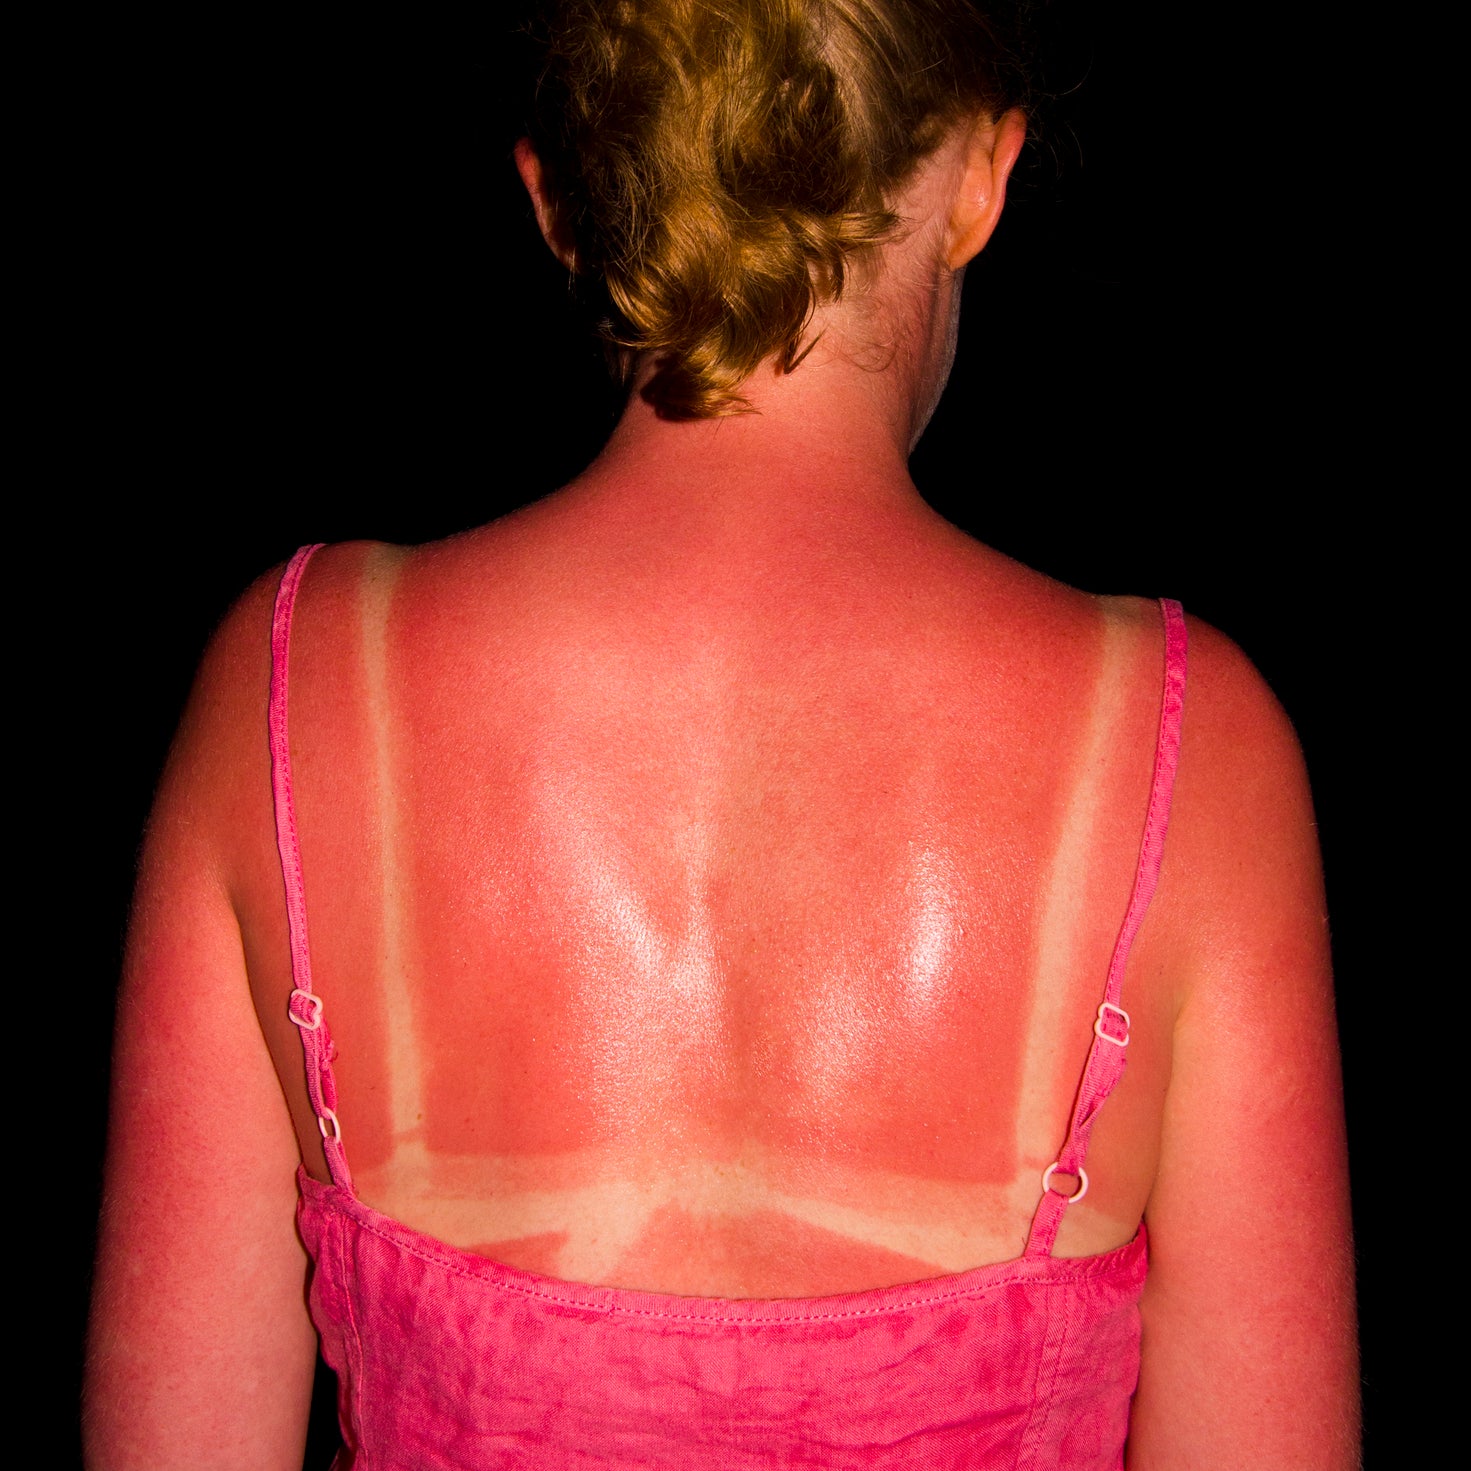 Person with sunburn on back and shoulders, contrasting with pale skin under spaghetti strap top